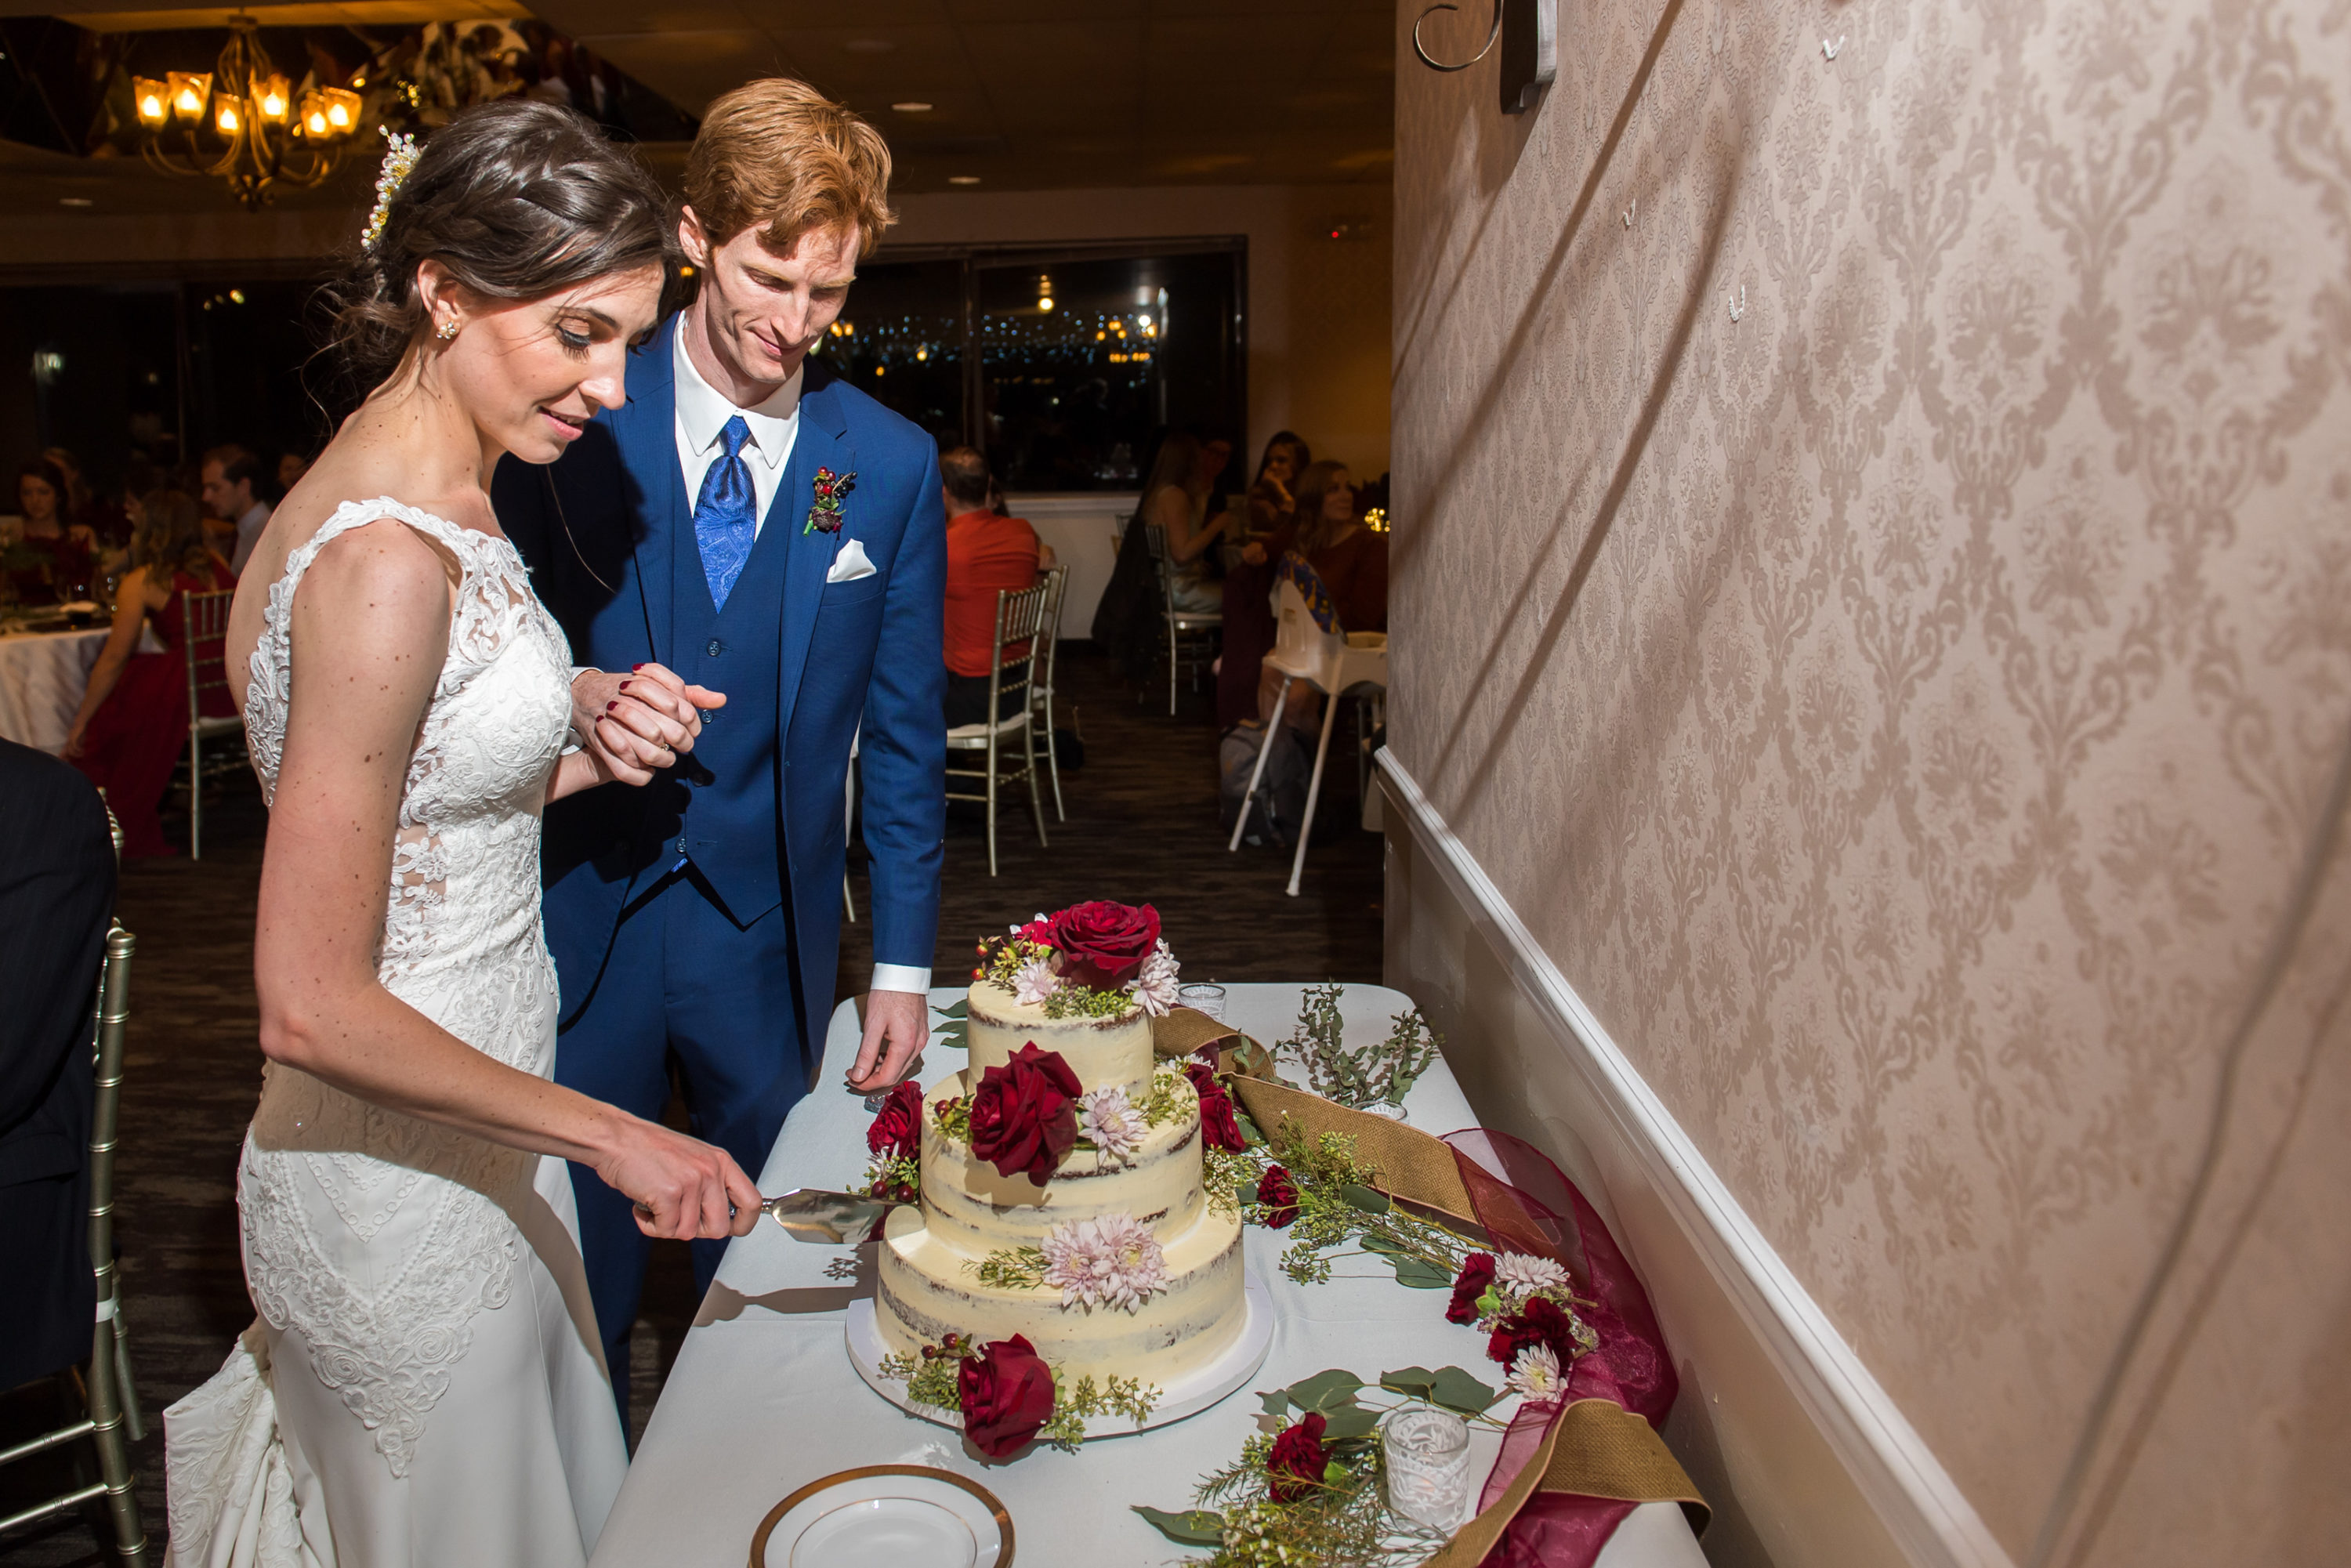 Bride and groom cut cake during a wedding reception at the Franciscan Event Center in Centennial, Colorado.